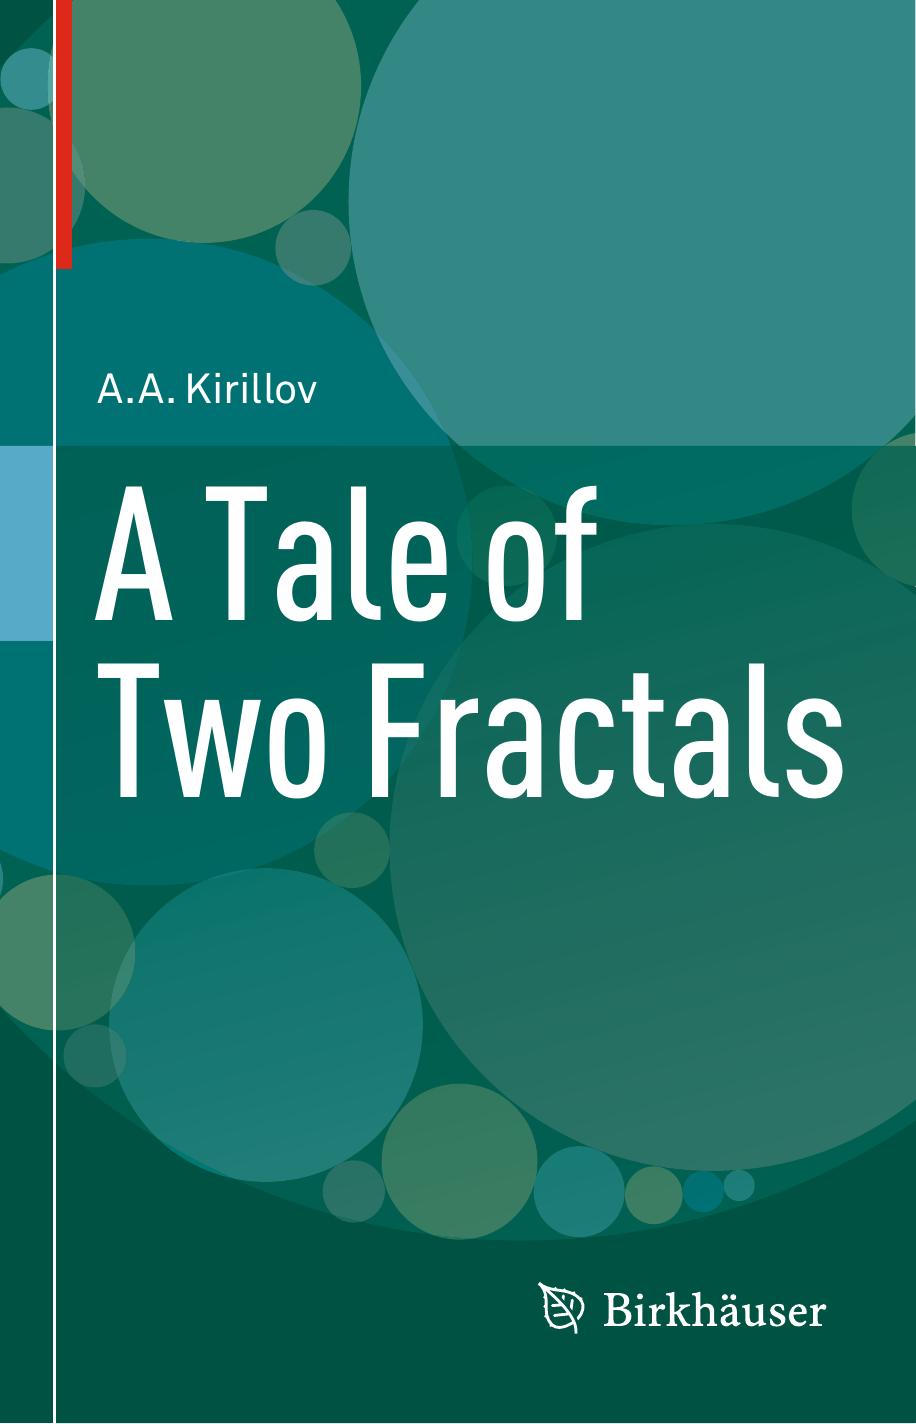 A Tale of Two Fractals